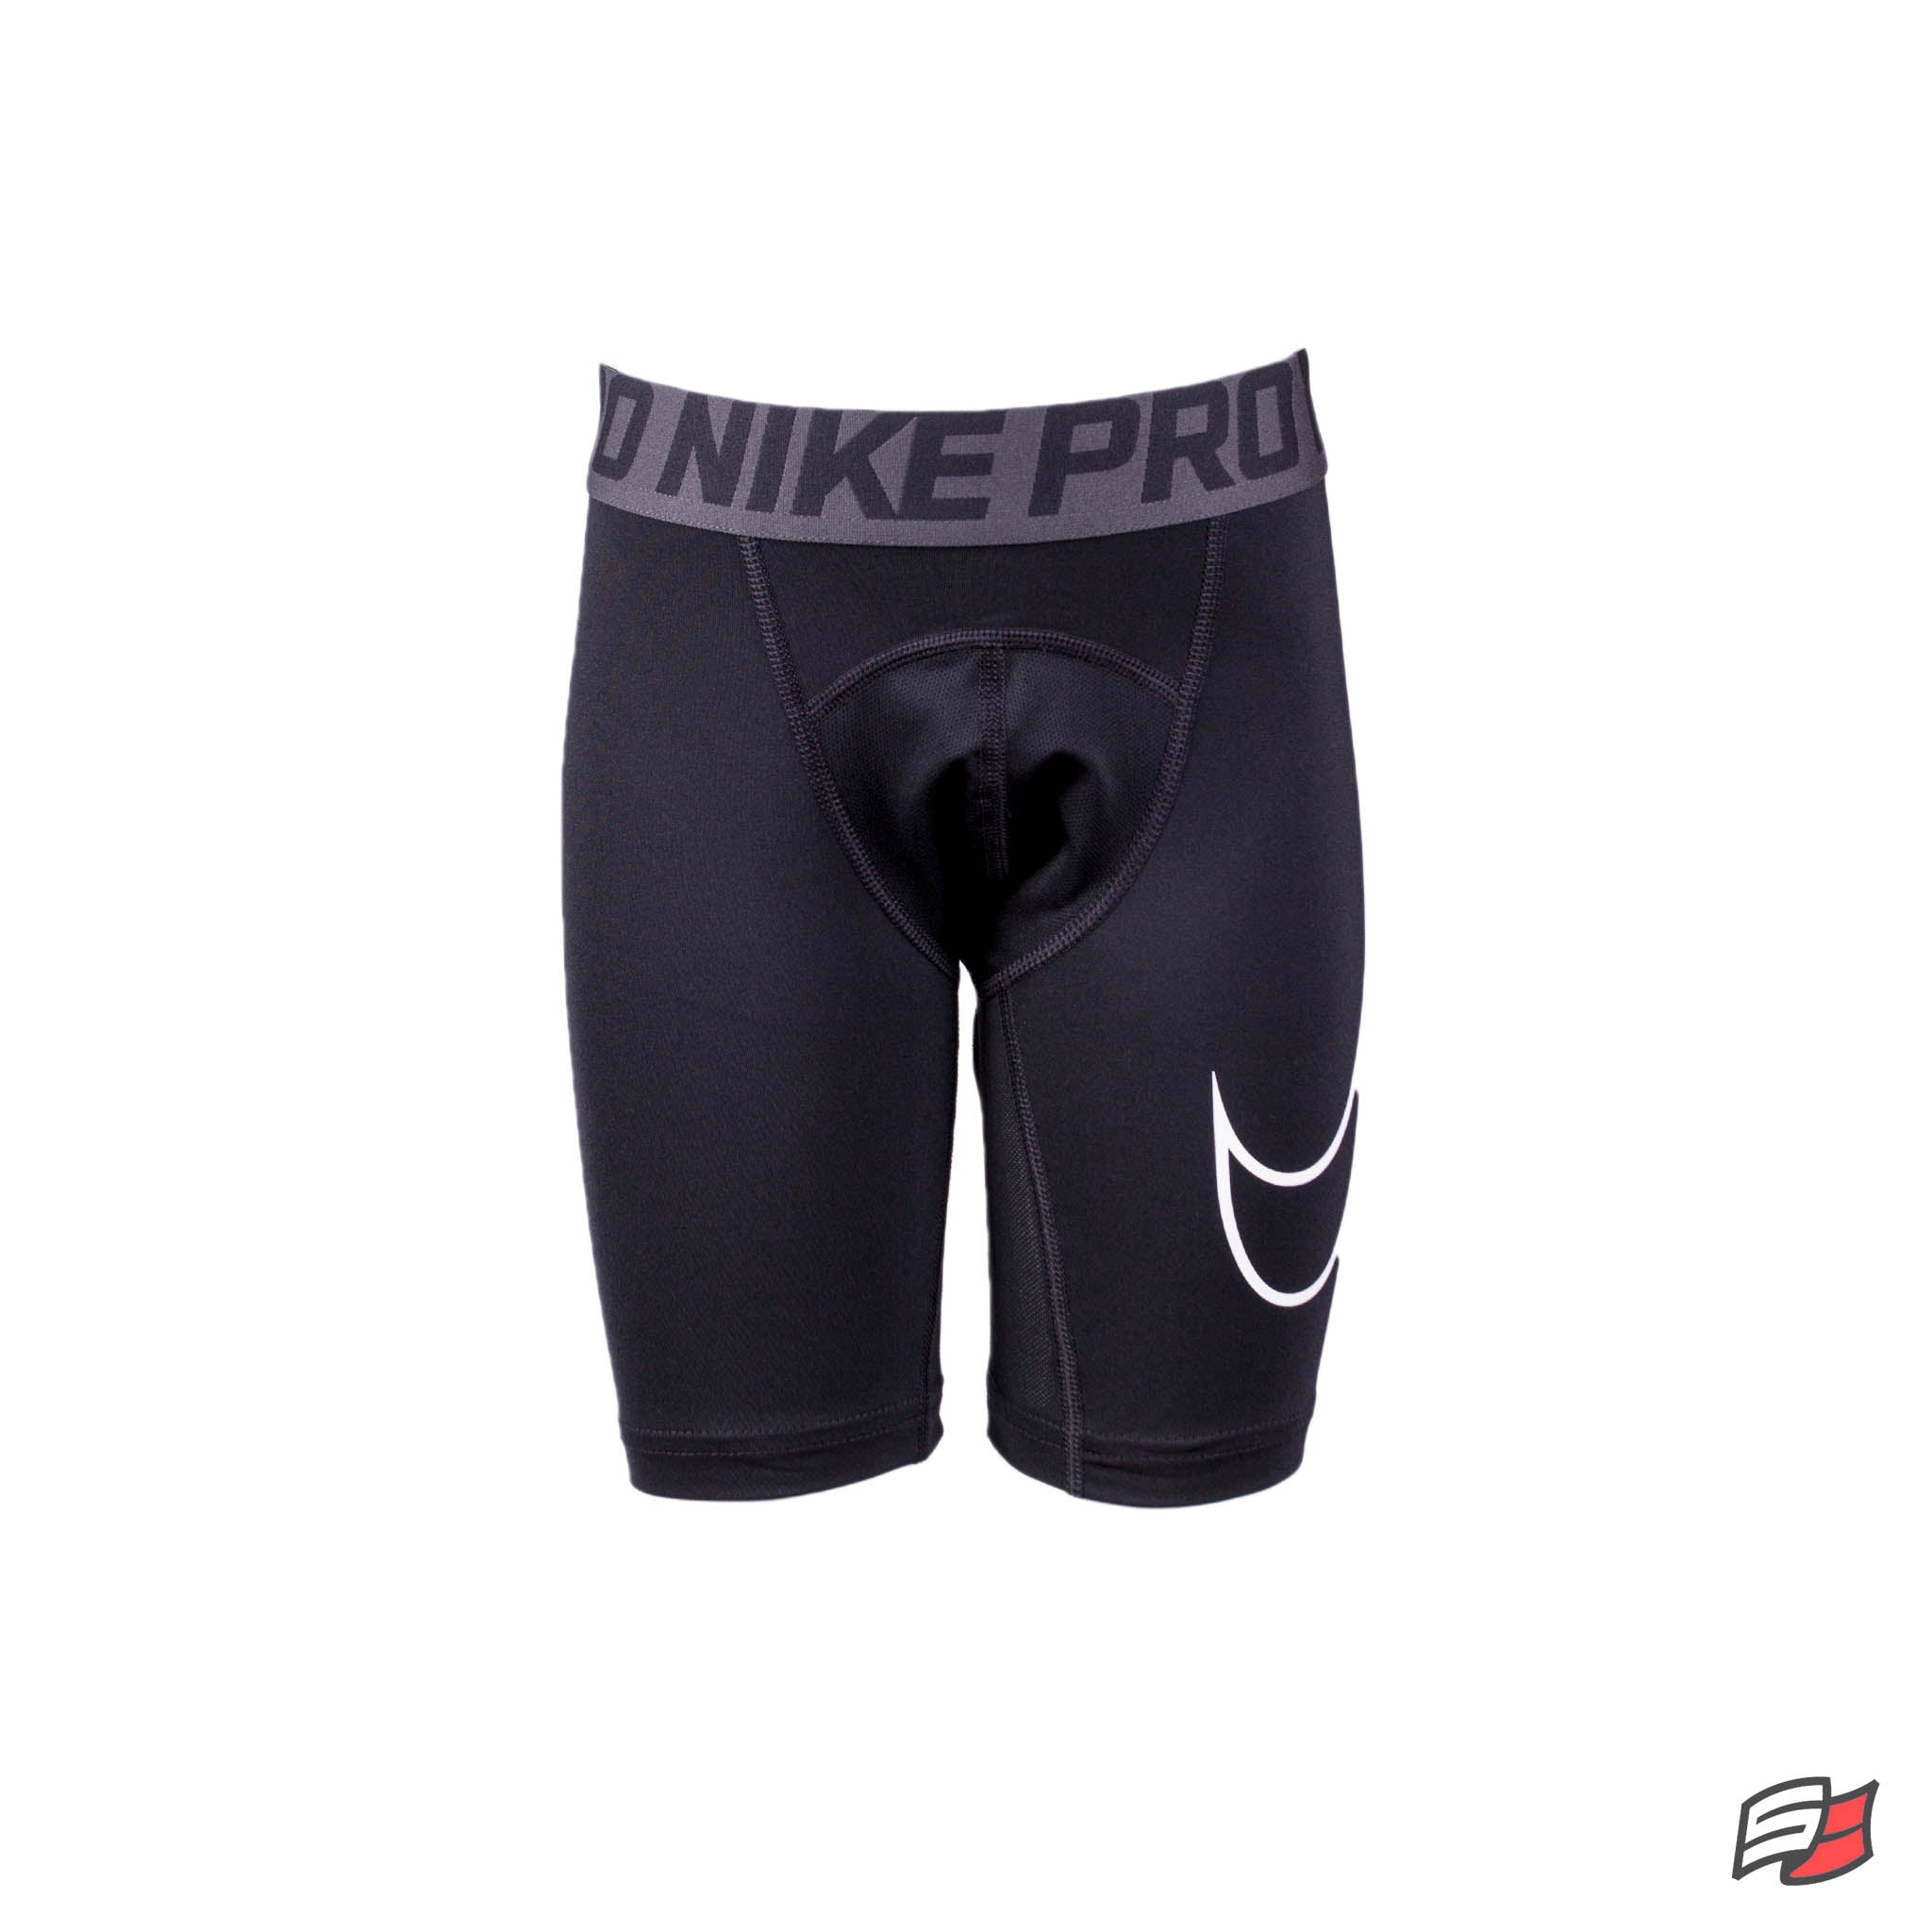 NIKE PRO COOL YOUTH COMPRESSION SHORT